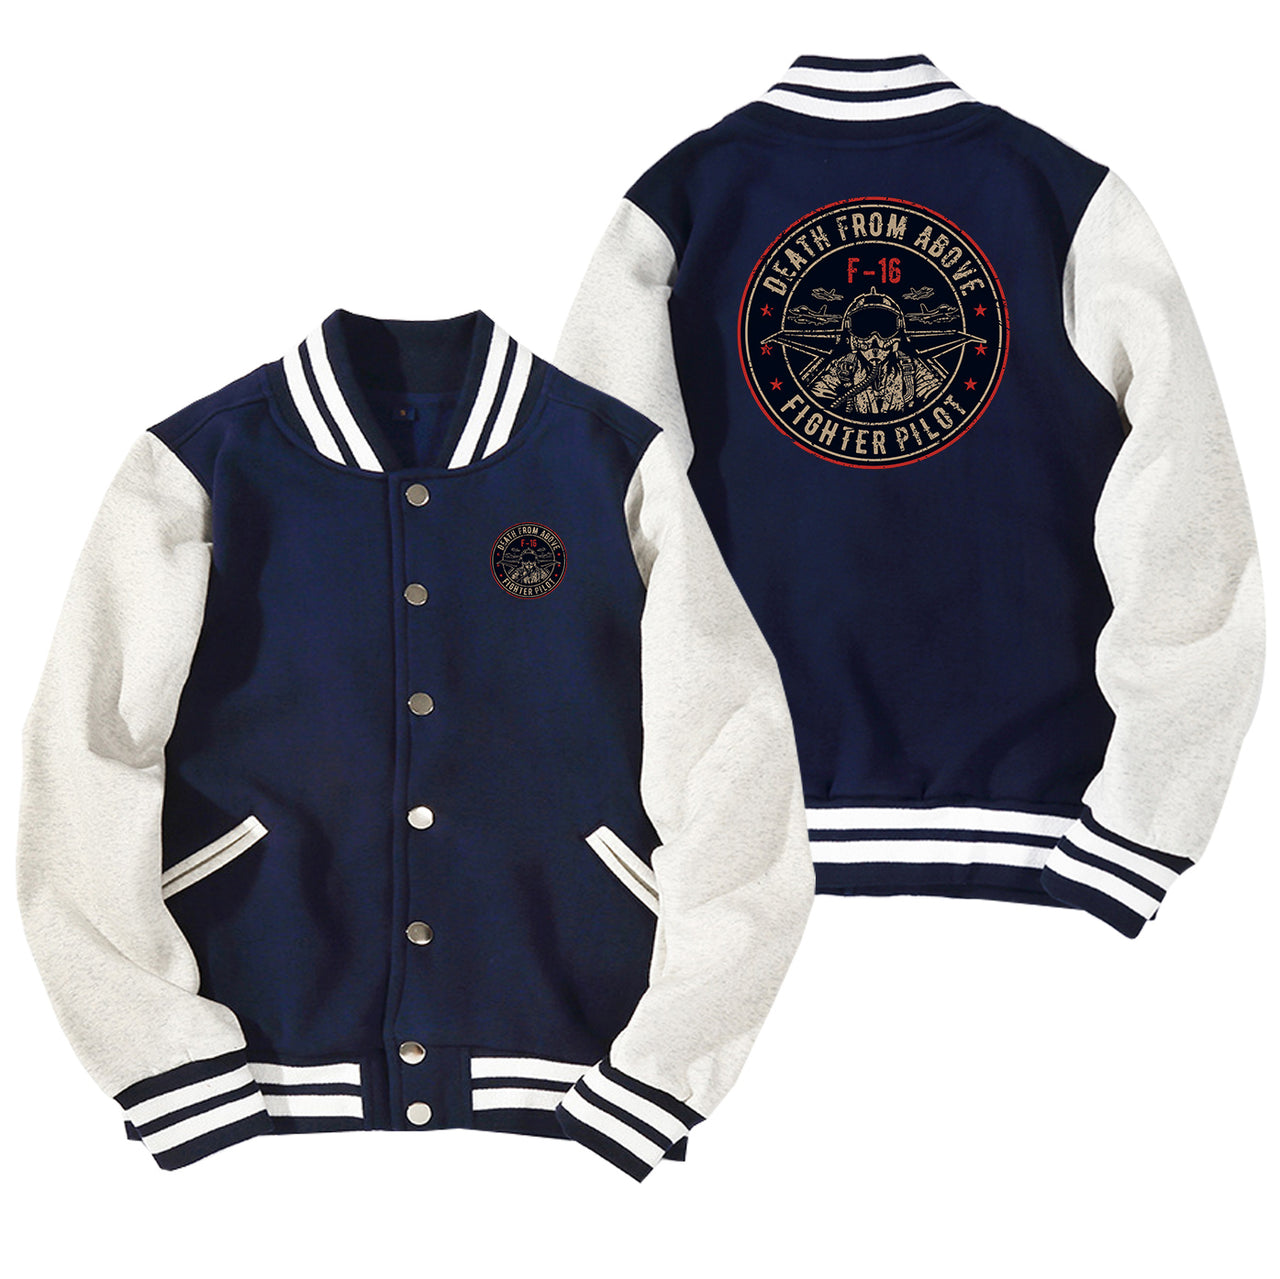 Fighting Falcon F16 - Death From Above Designed Baseball Style Jackets